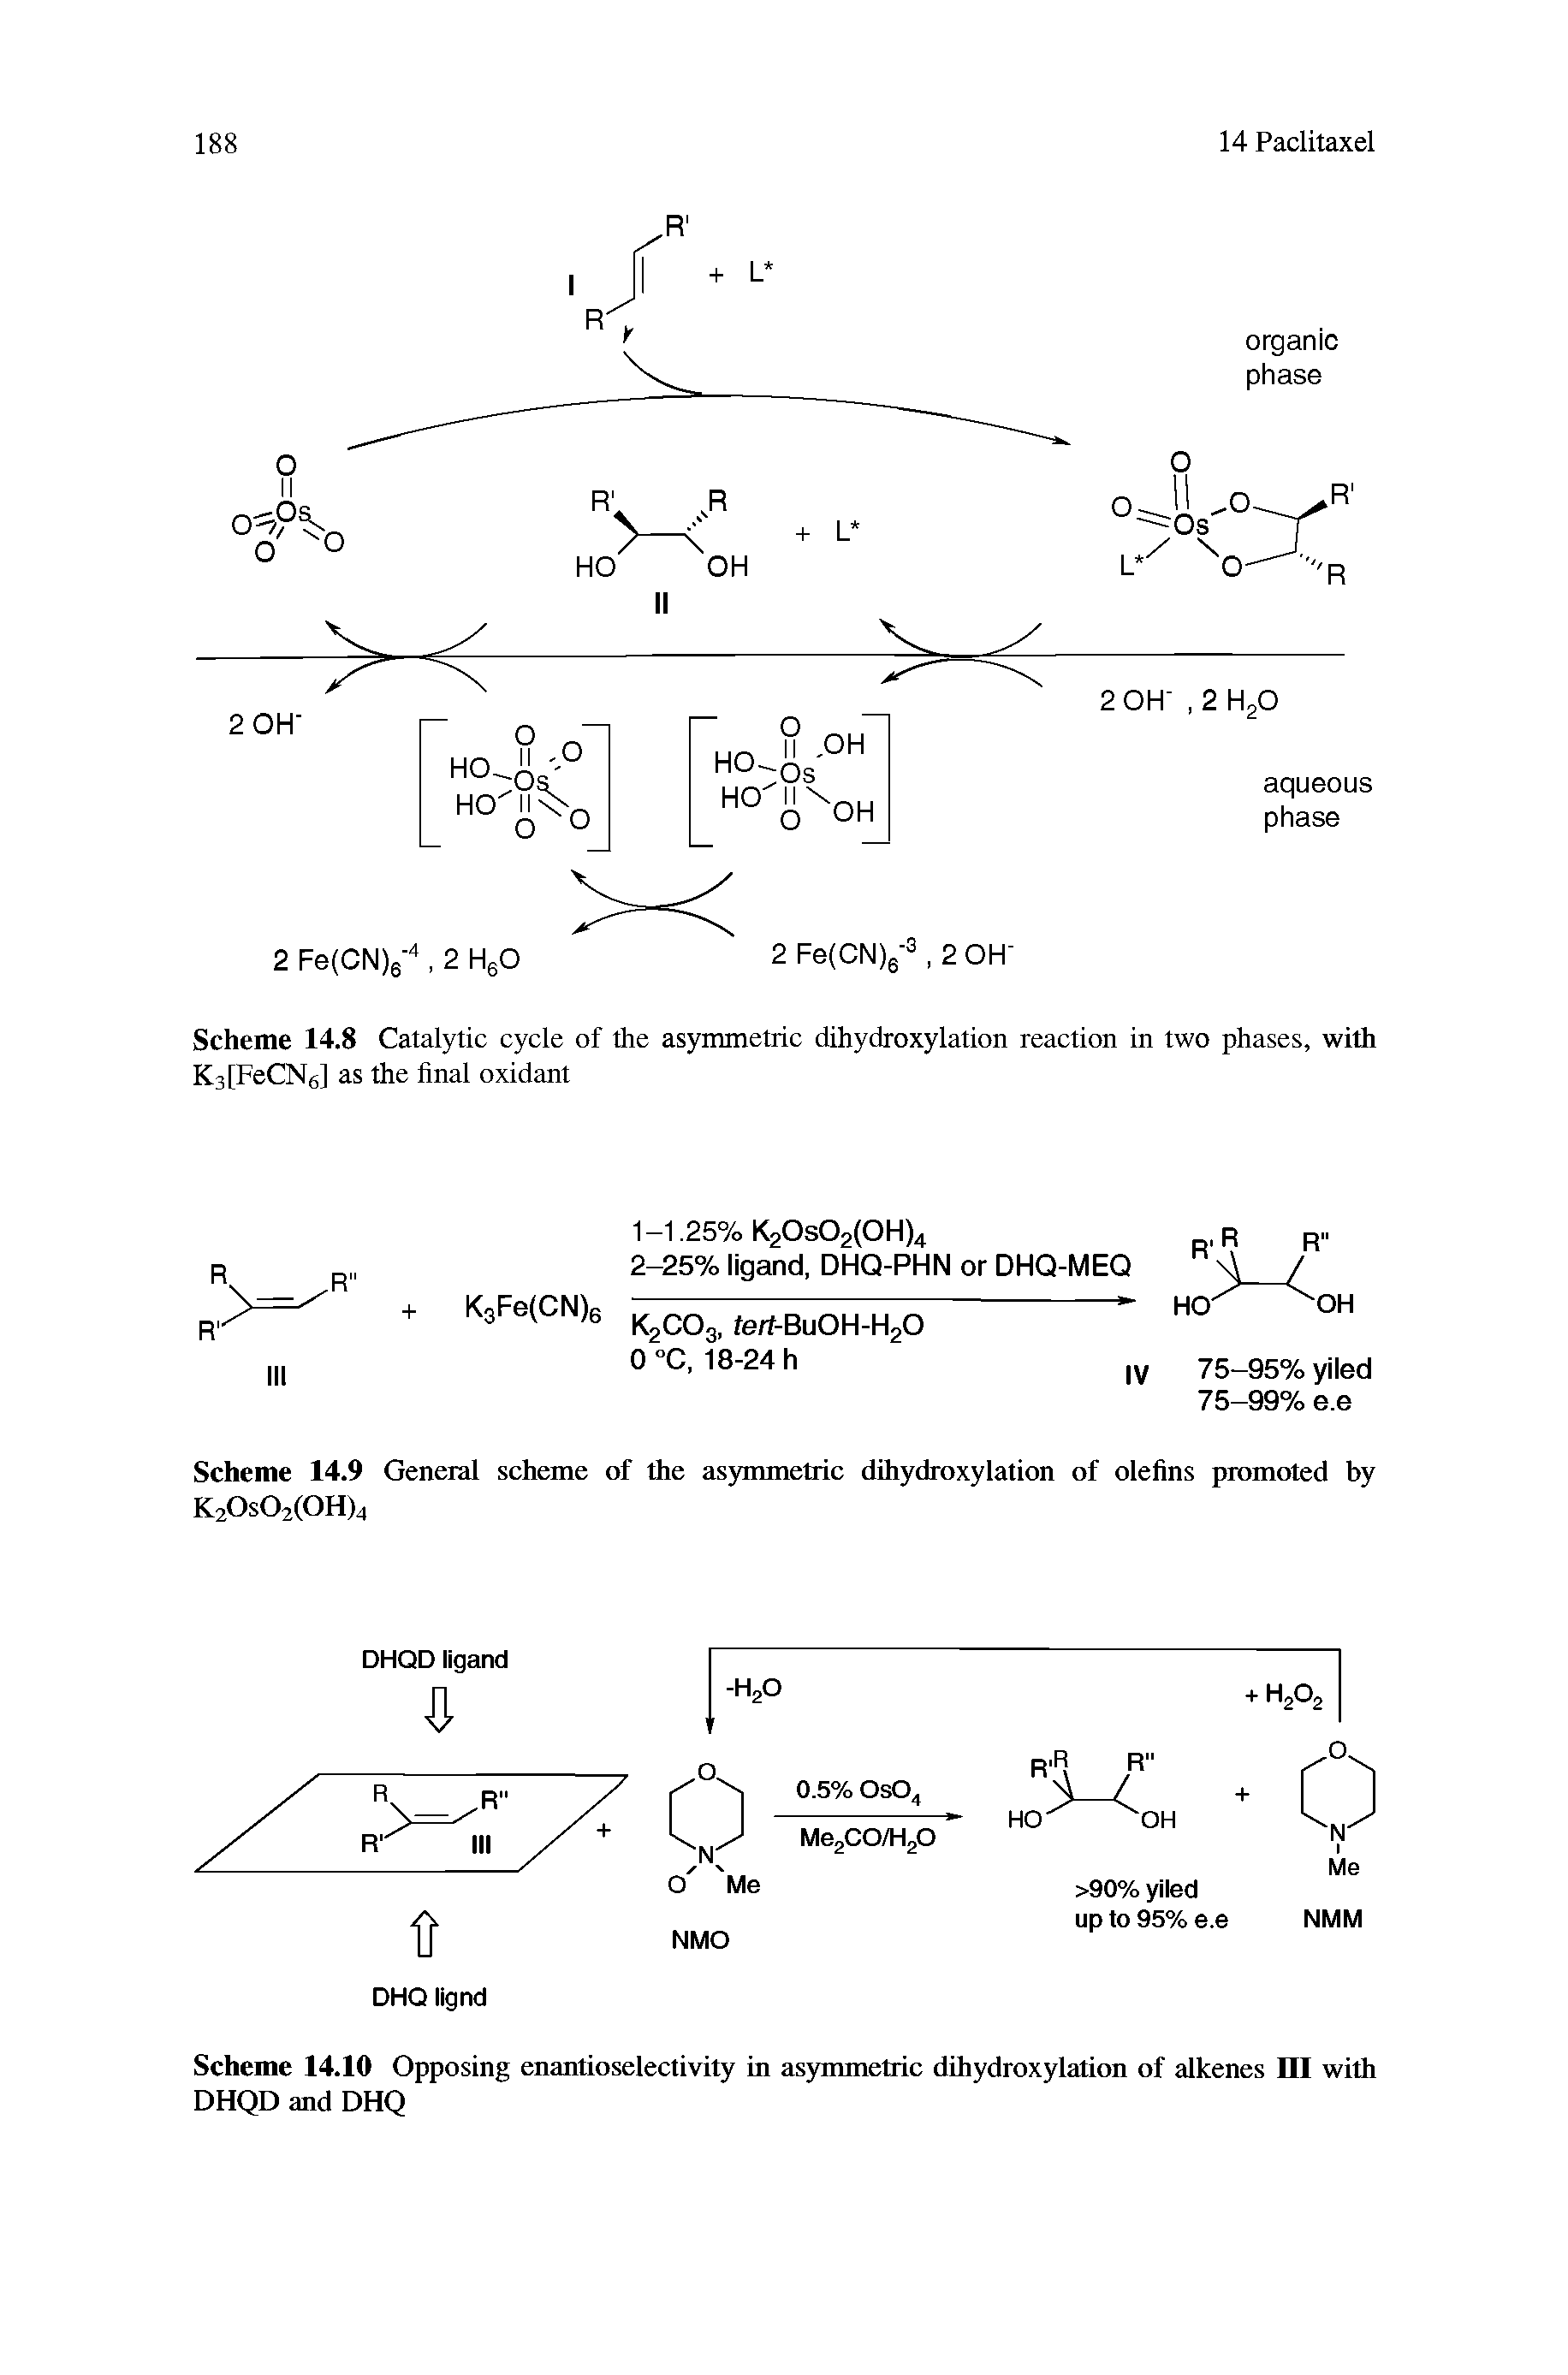 Scheme 14.8 Catalytic cycle of the asymmetric dihydroxylation reaction in two phases, with KalFeCNe] as the final oxidant...